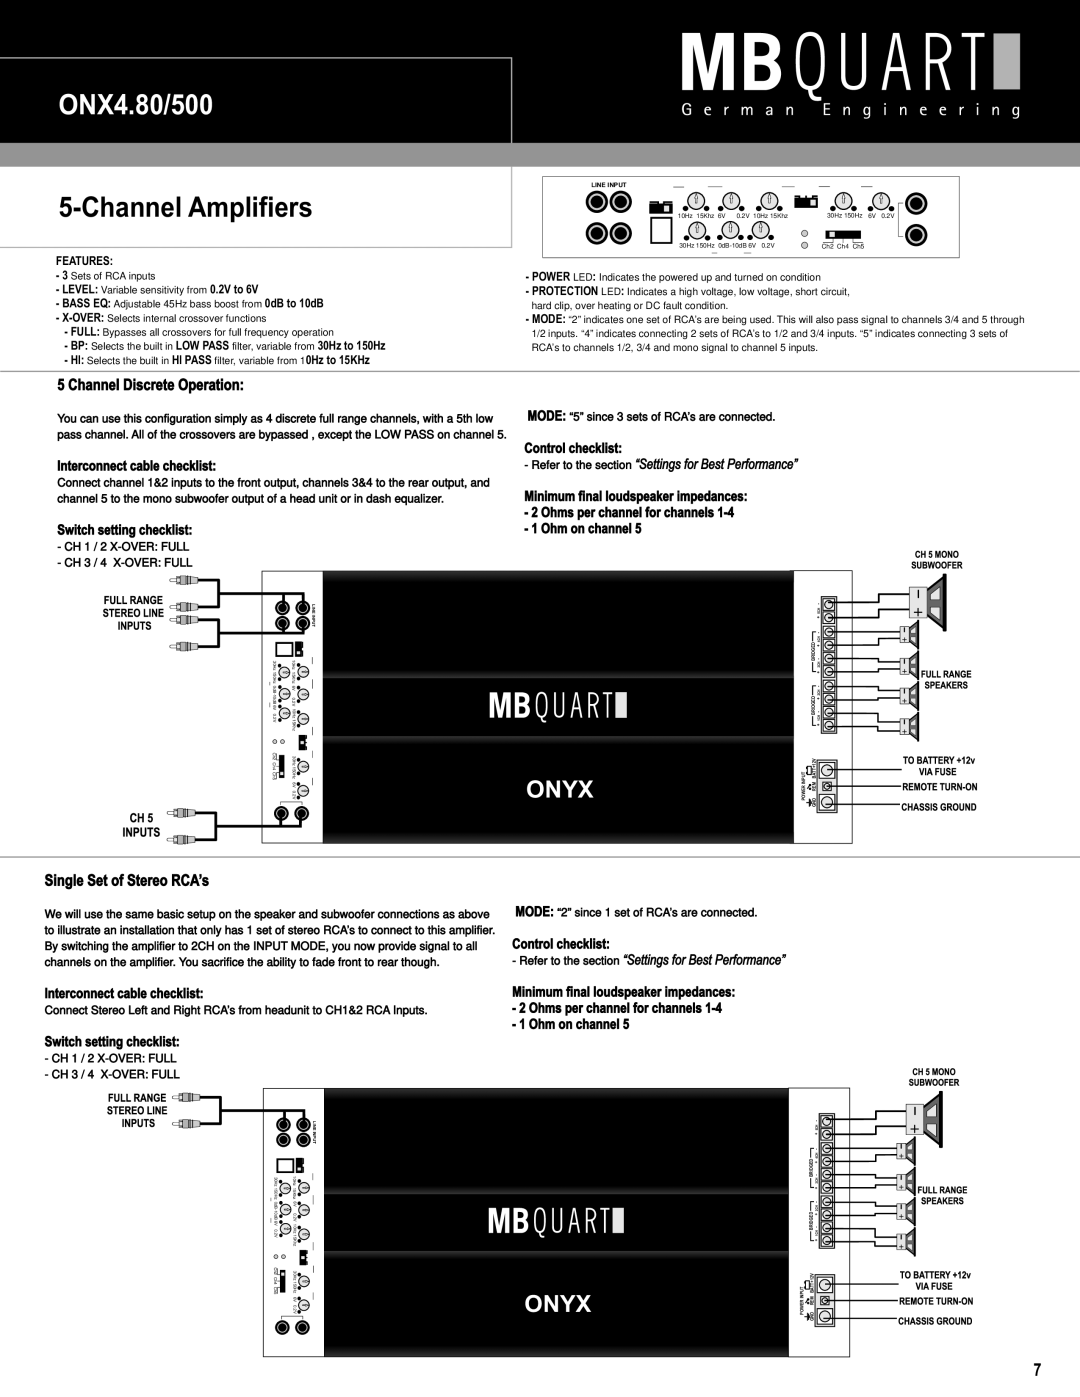 MB QUART ONX1.1500D, ONX4.60 ONX4.80/500, Channel Amplifiers, Onyx, Refer to the section “Settings for Best Performance” 